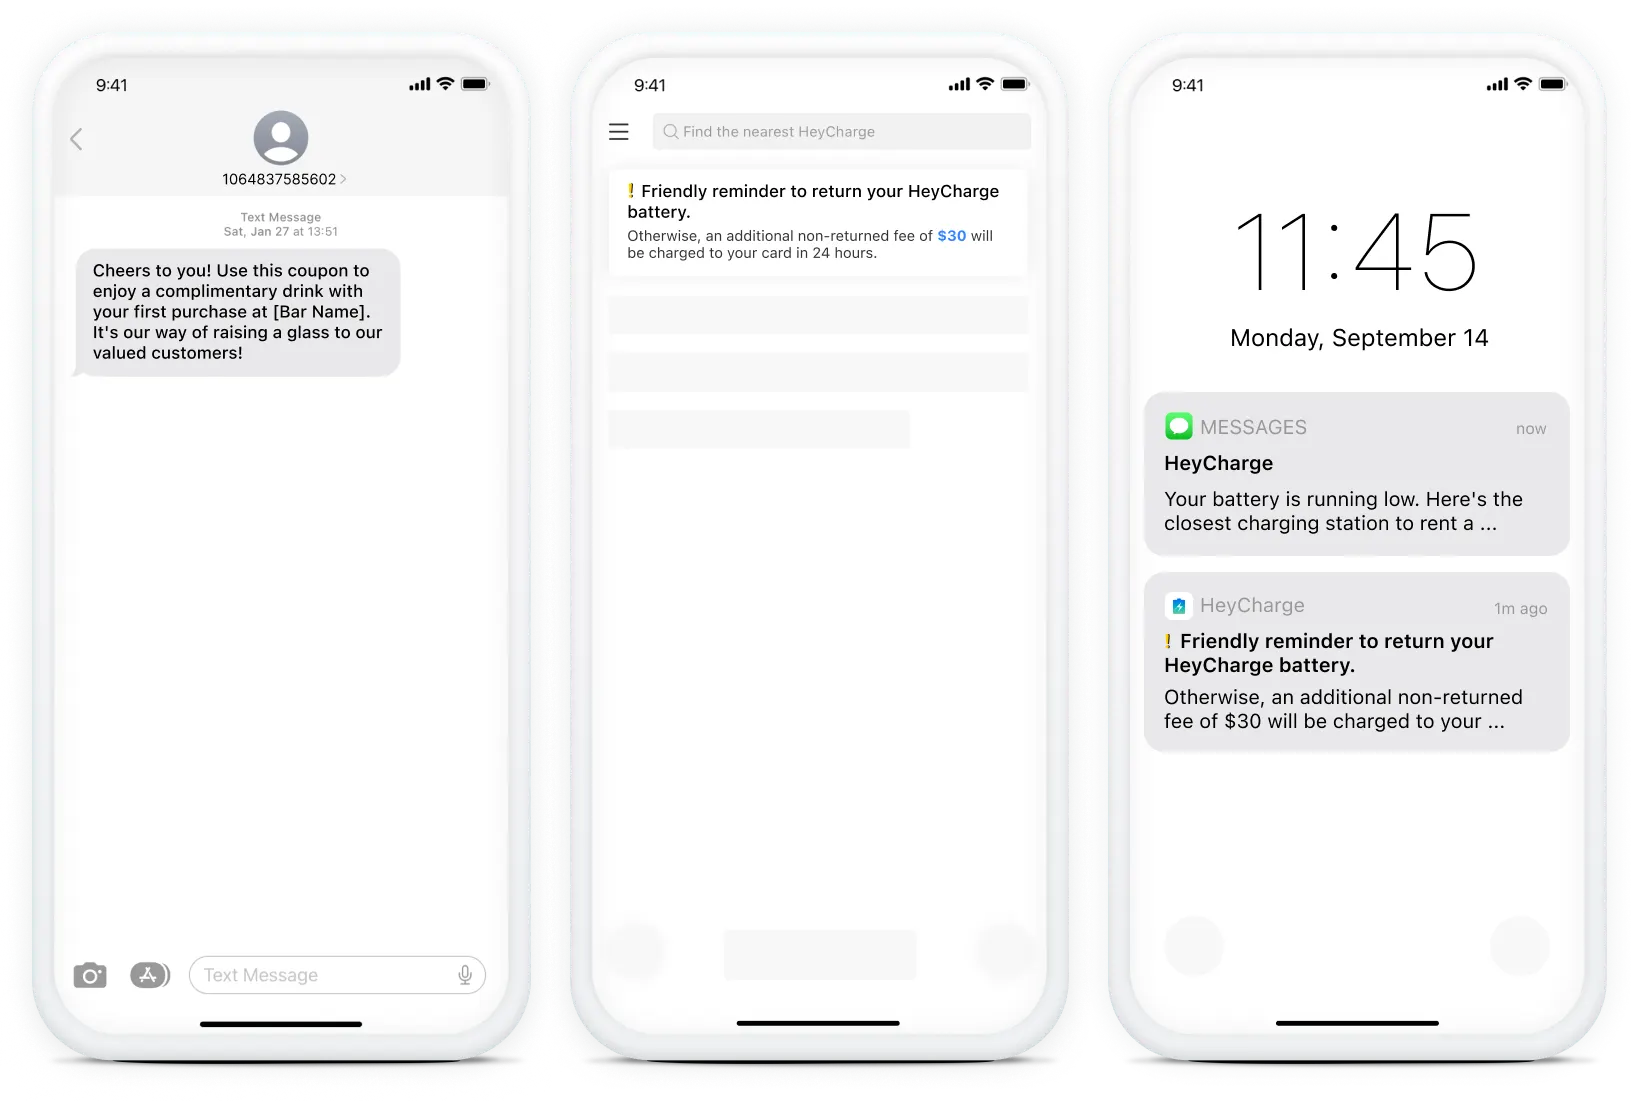 SMS and in-app messages